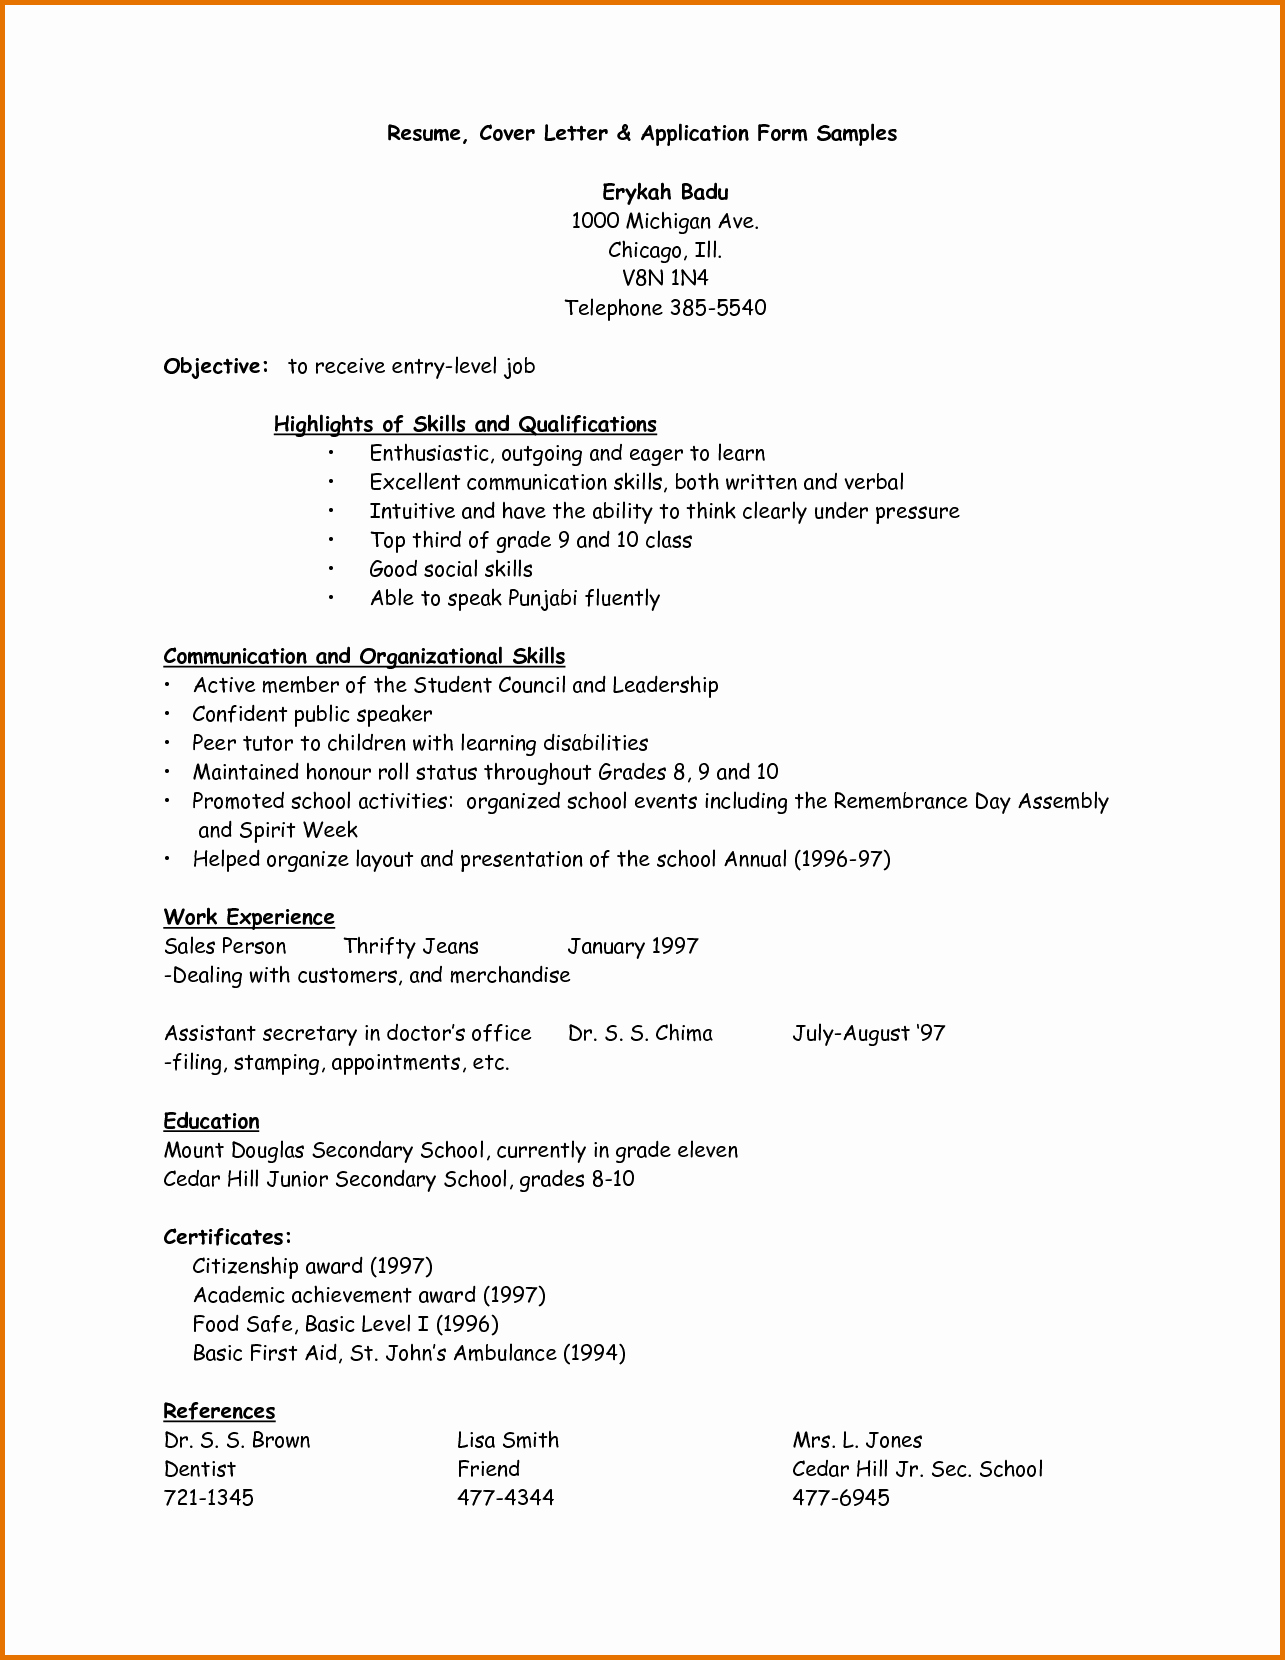 Cv and Cover Letter Template Fresh Sample Of Application Letter and Resumereference Letters